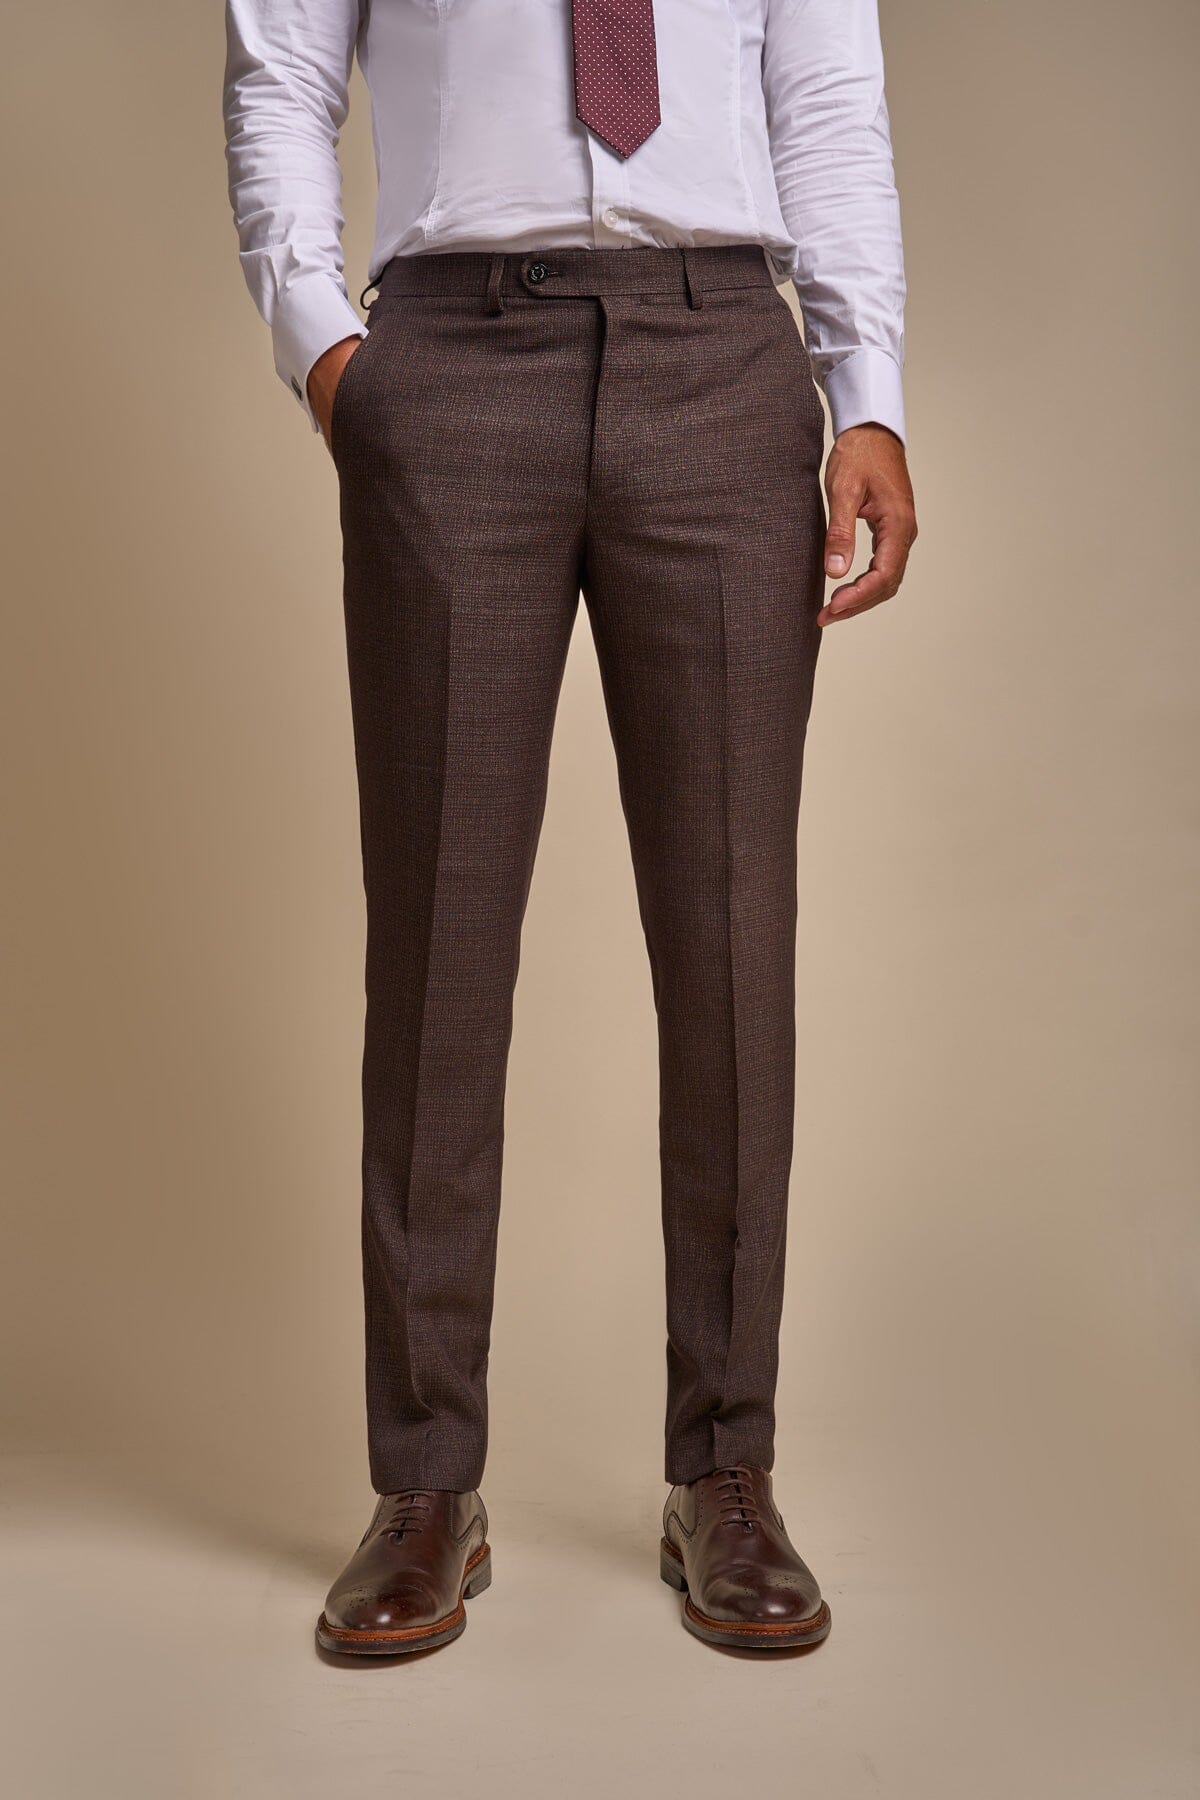 Caridi Brown Trousers - Trousers - 28R 